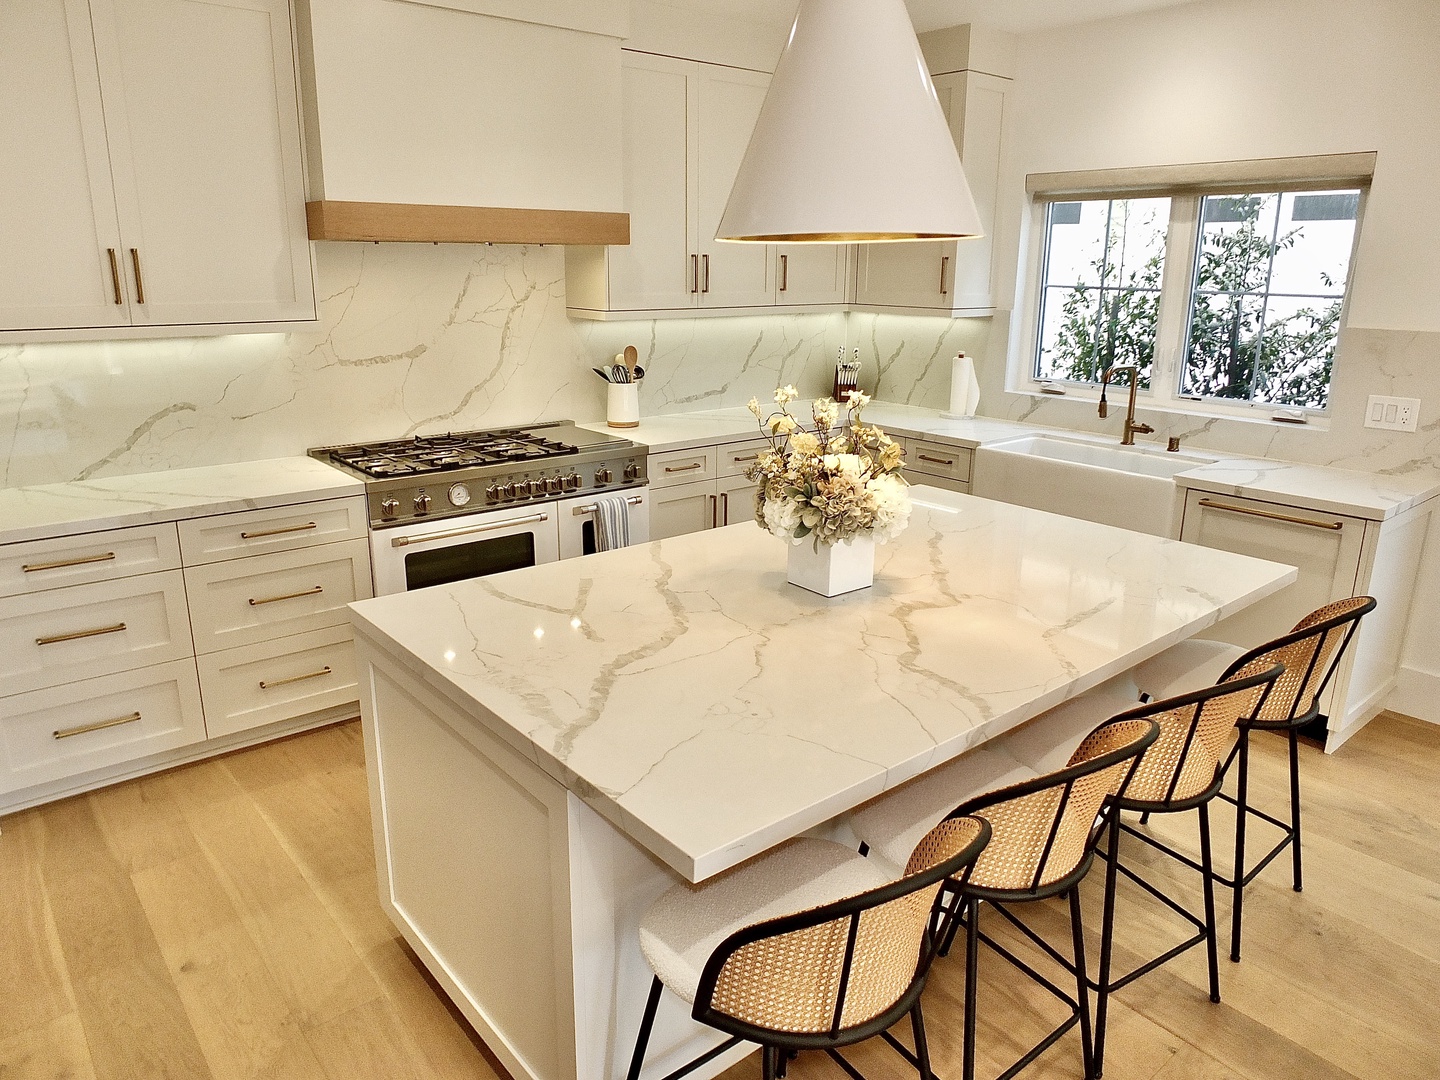 The elegant kitchen is a chef’s dream & offers every home comfort